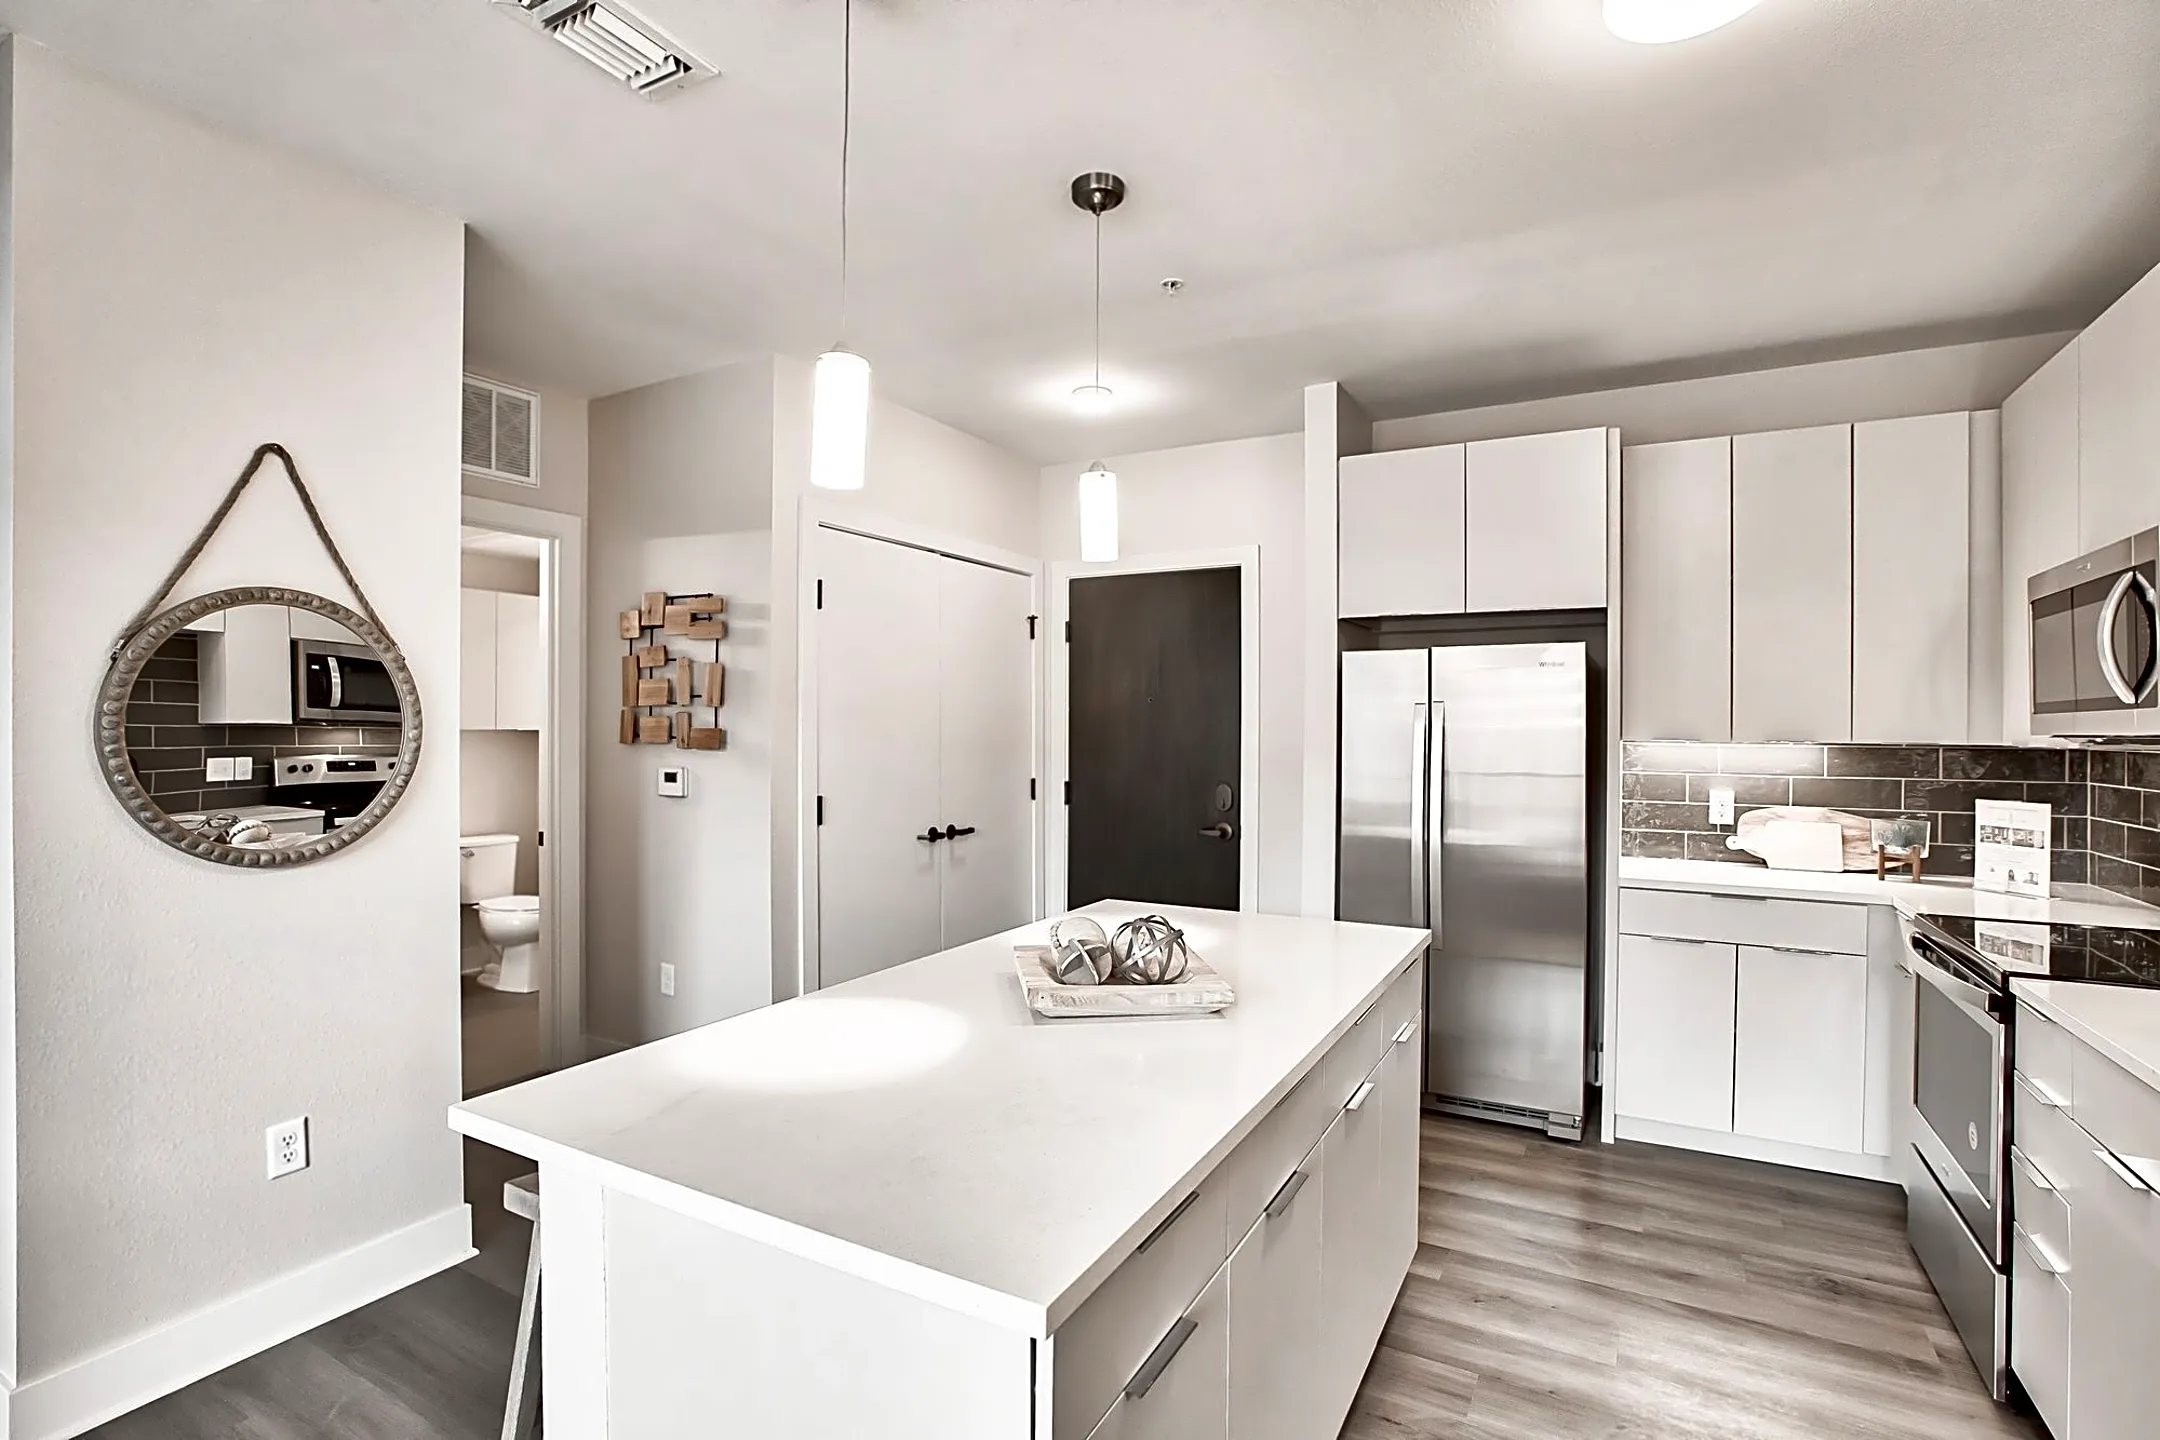 Kitchen - Ascent Apartments - Westminster, CO